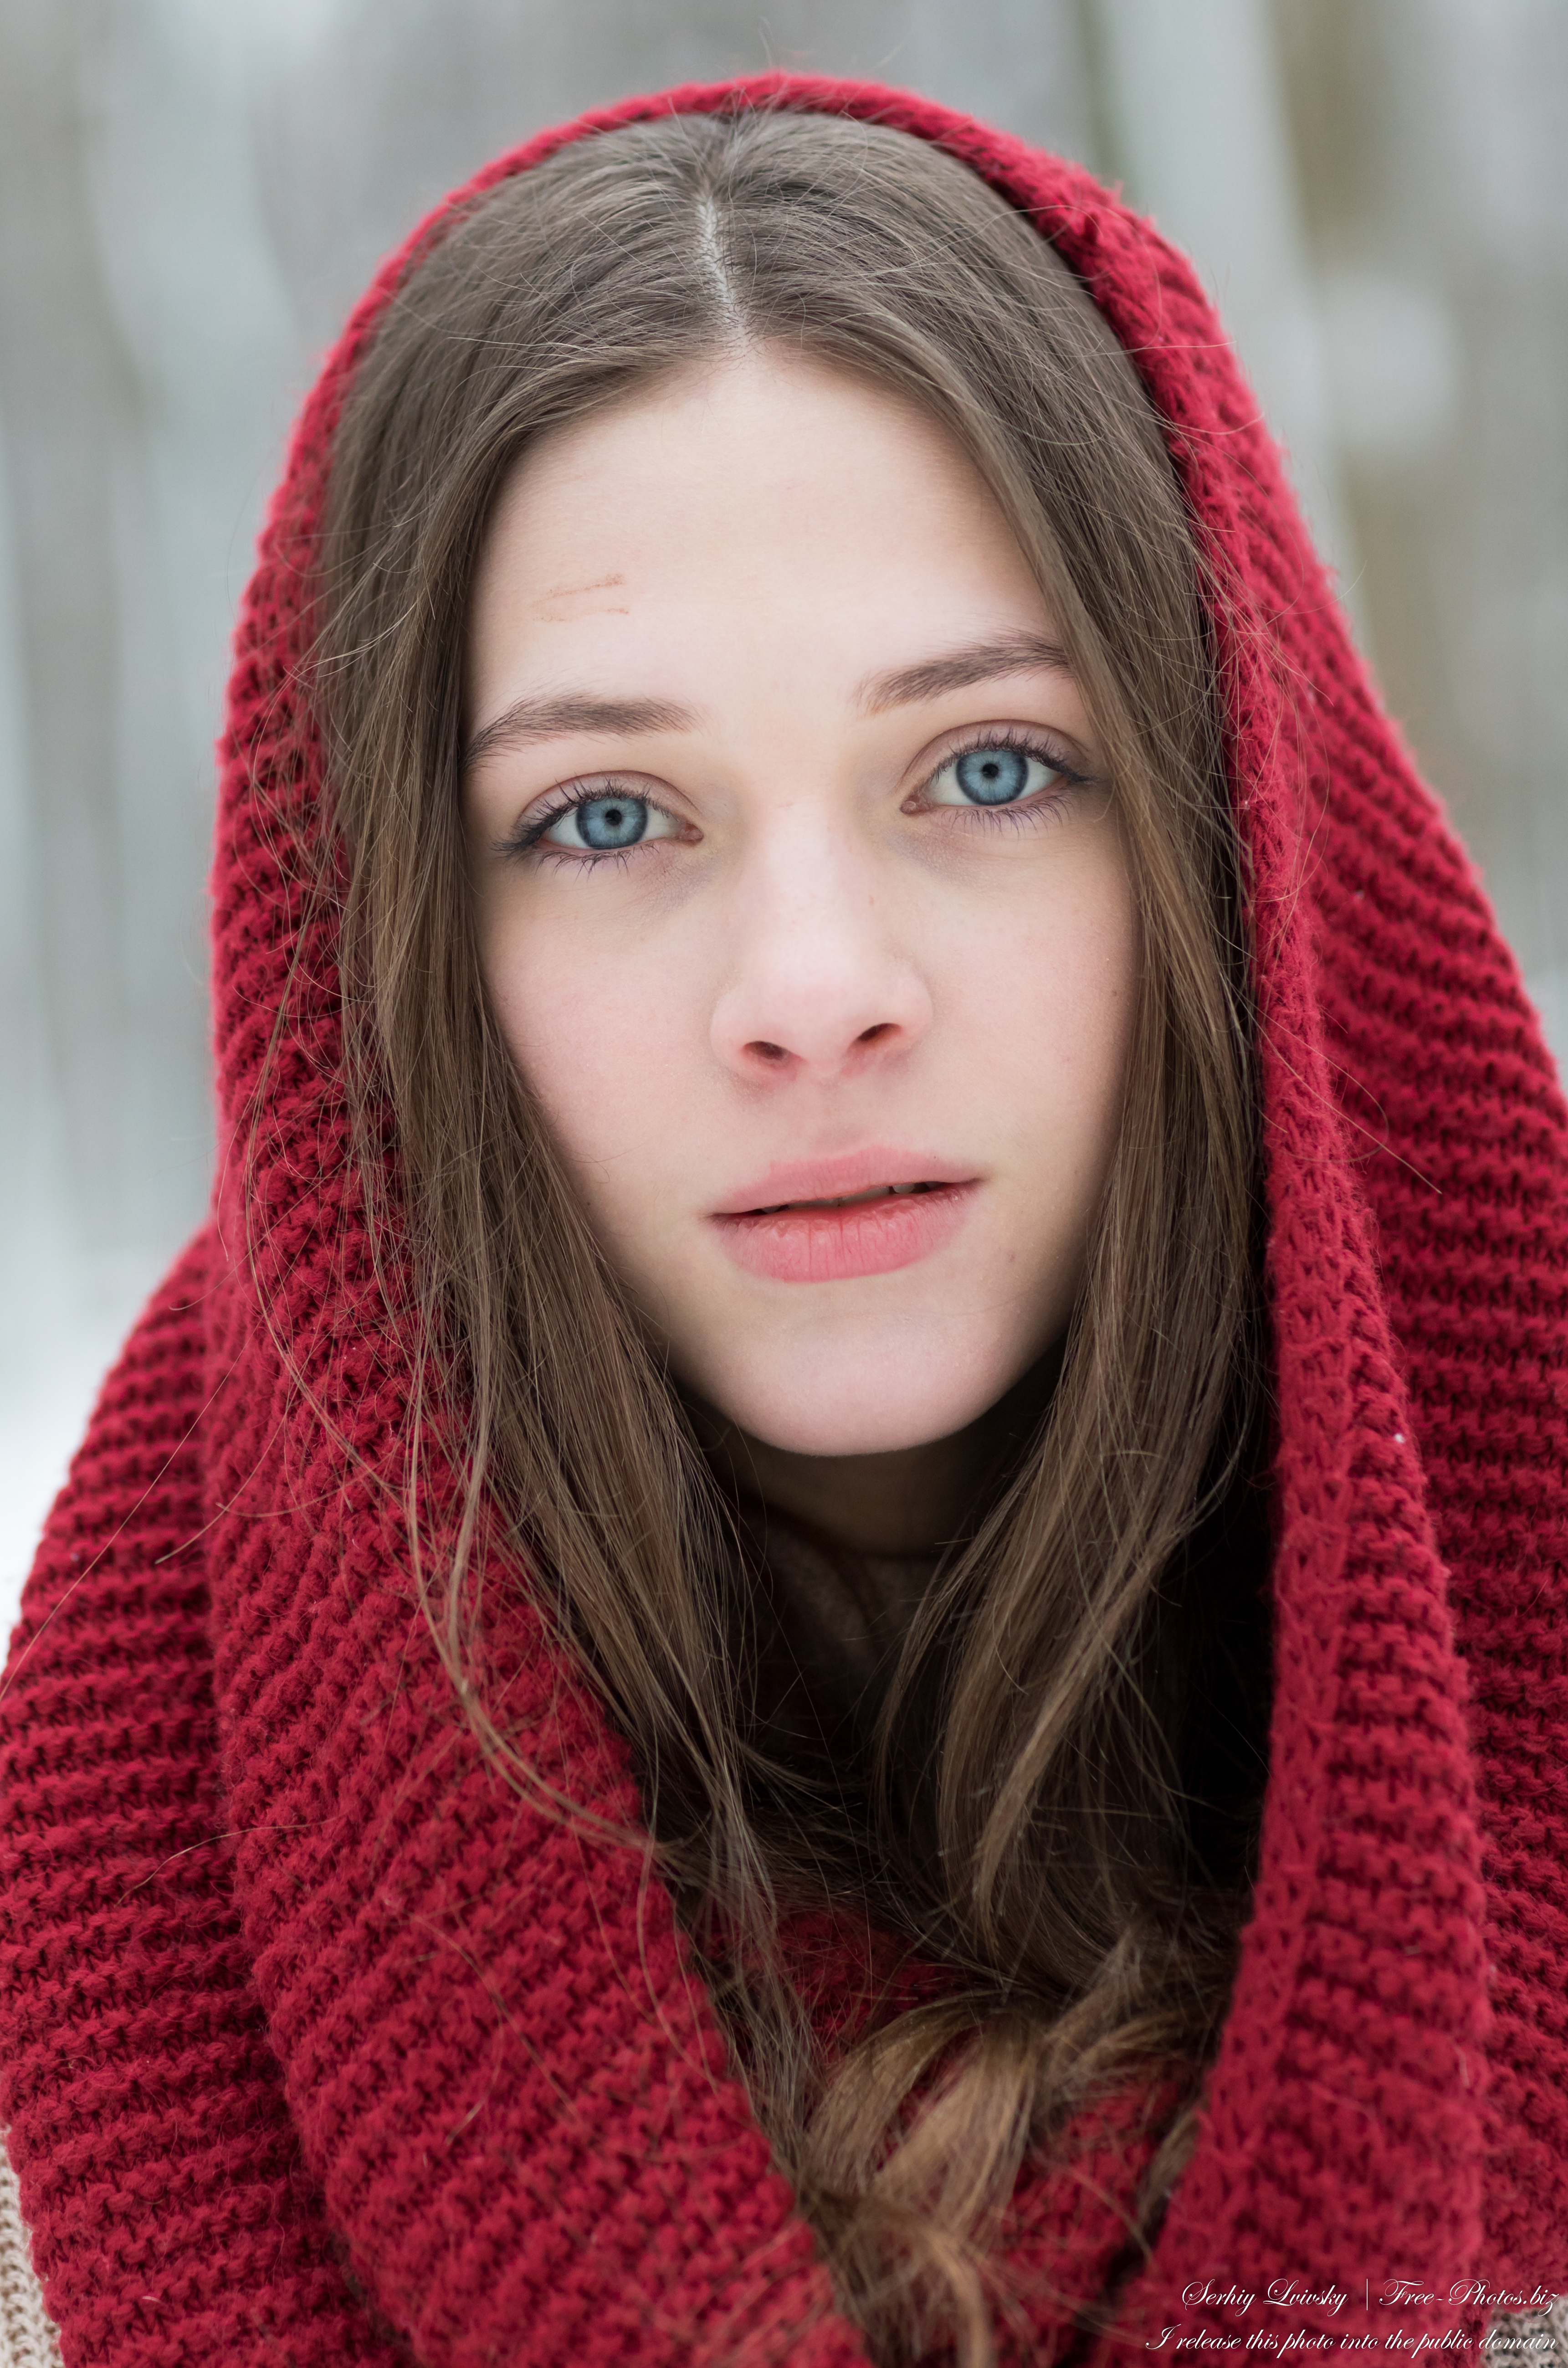 sophia_a_17-year-old_girl_with_blue_eyes_photographed_by_serhiy_lvivsky_in_jan_2022_19